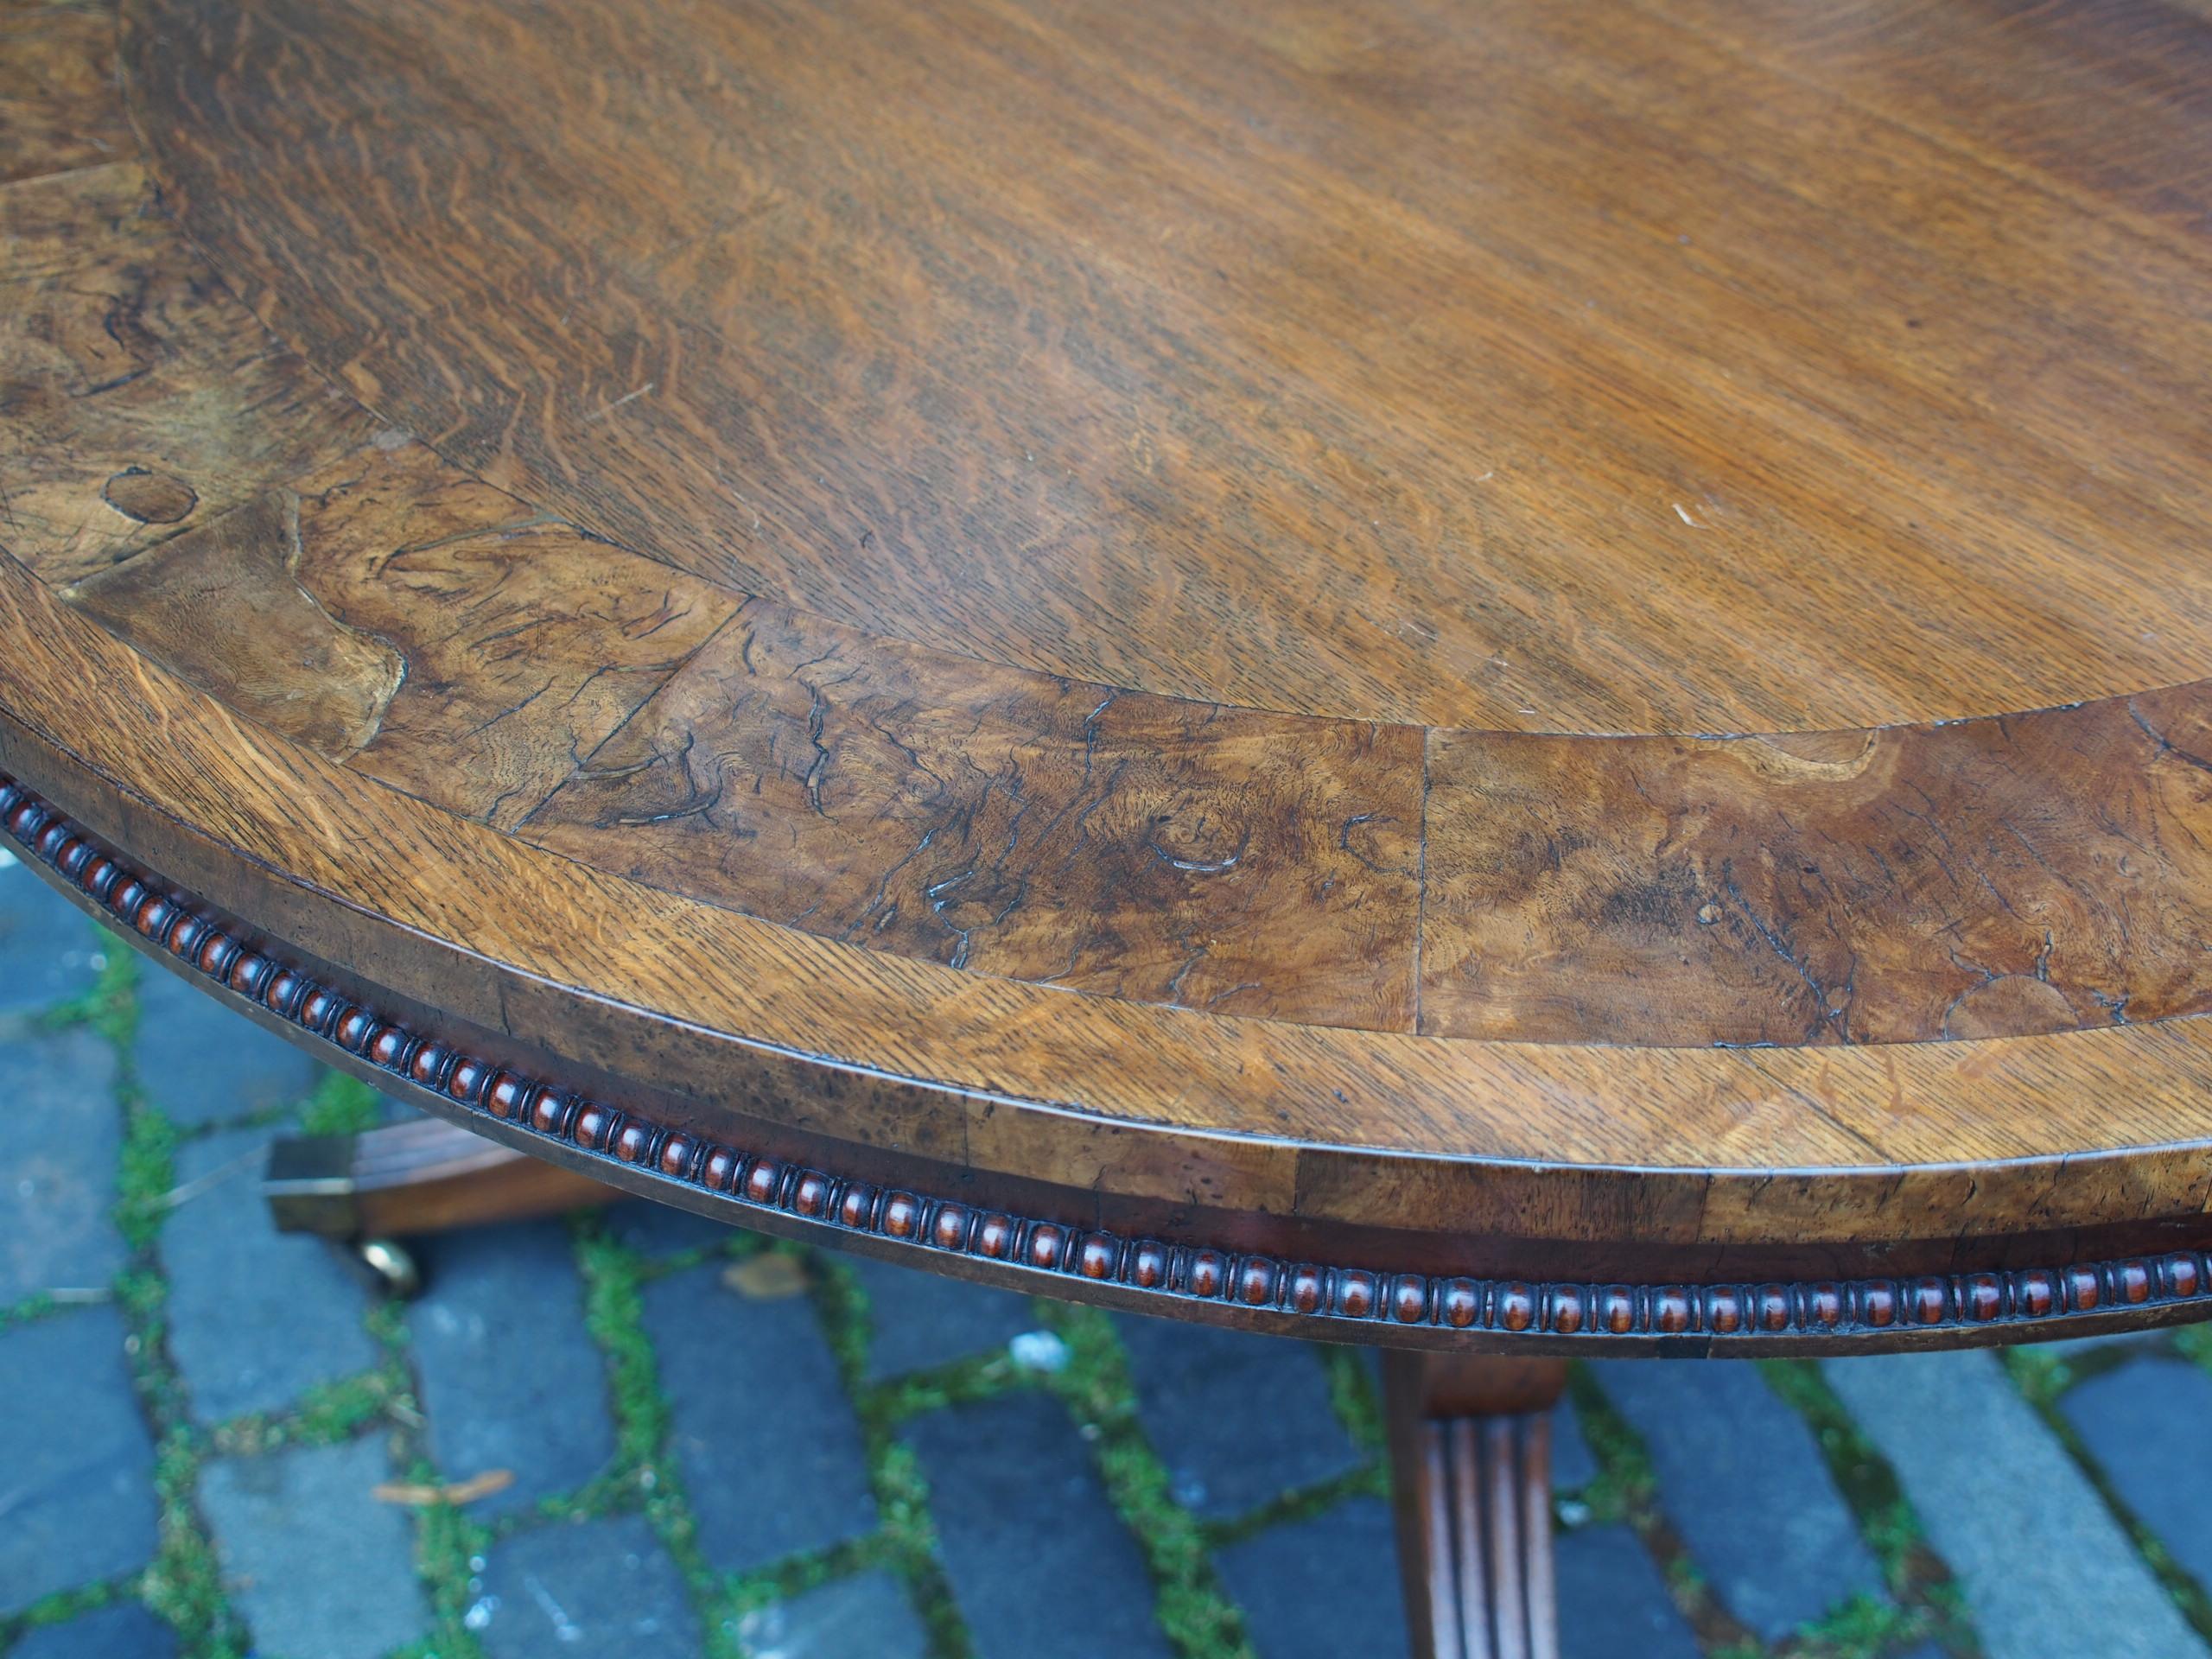 Circa 1815, regency circular oak and pollard oak breakfast table by William Trotter of Edinburgh. With its solid oak top, large 12cm banding of pollard oak, simple fore-edge and shallow cross-banded and beaded frieze with further pollard oak